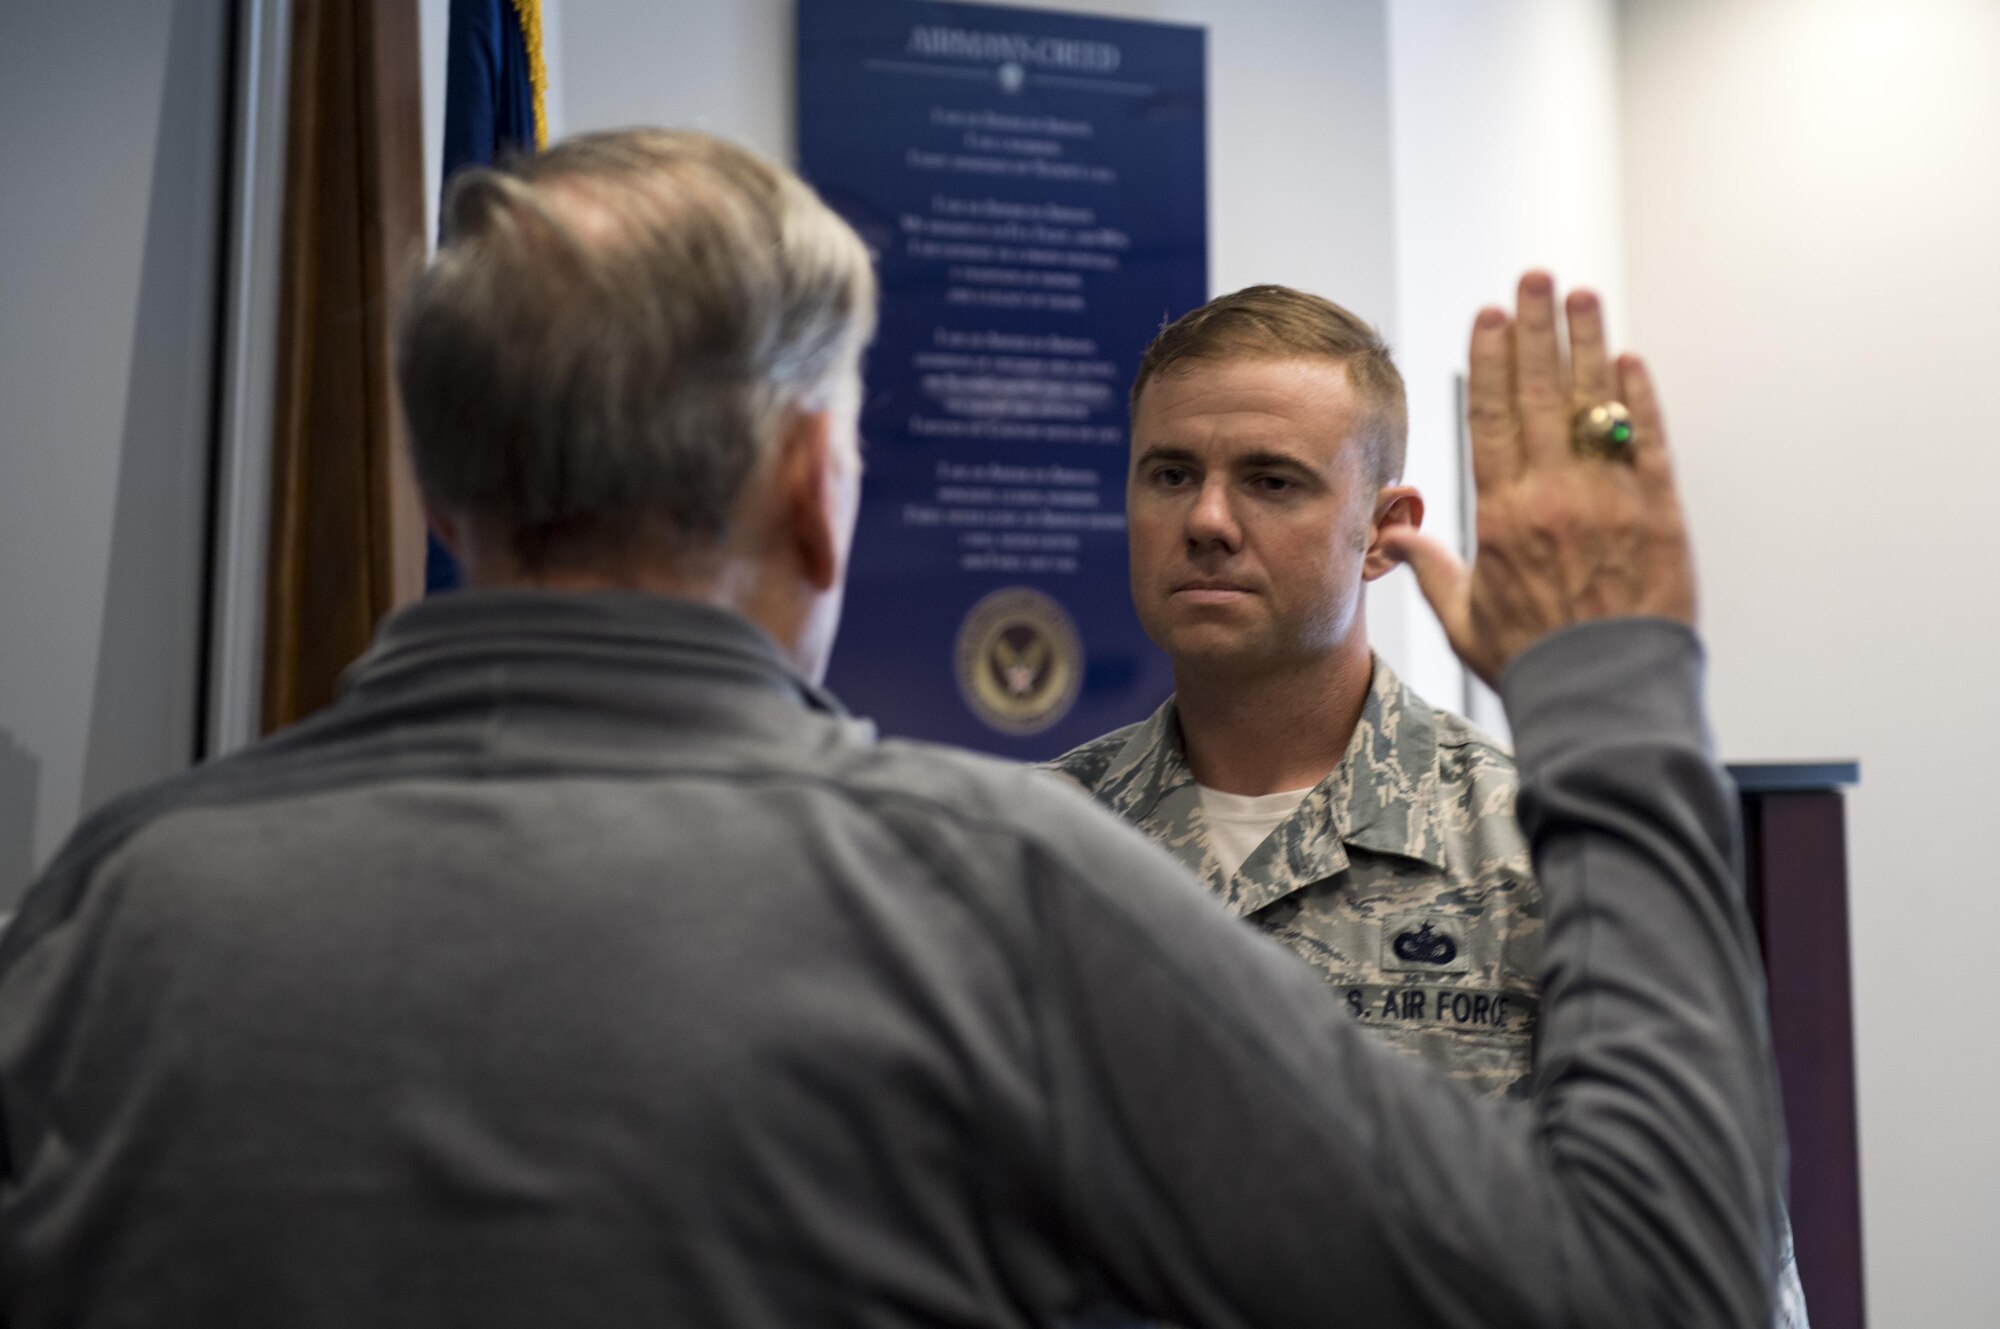 Retired chief of staff Gen. John Jumper reenlists Staff Sgt. Scott Shirley, 824th Base Defense Squadron NCO in charge of plans and programs, during the 820th Base Defense Group’s 20th Anniversary Ceremony, March 28, 2017, at Moody Air Force Base, Ga. Jumper was a command pilot with more than 5,000 flying hours, including 1,400 combat hours. The celebration included an 820th BDG capabilities demo, a reenlistment ceremony and a formal dinner. (U.S. Air Force photo by Airman 1st Class Daniel Snider)